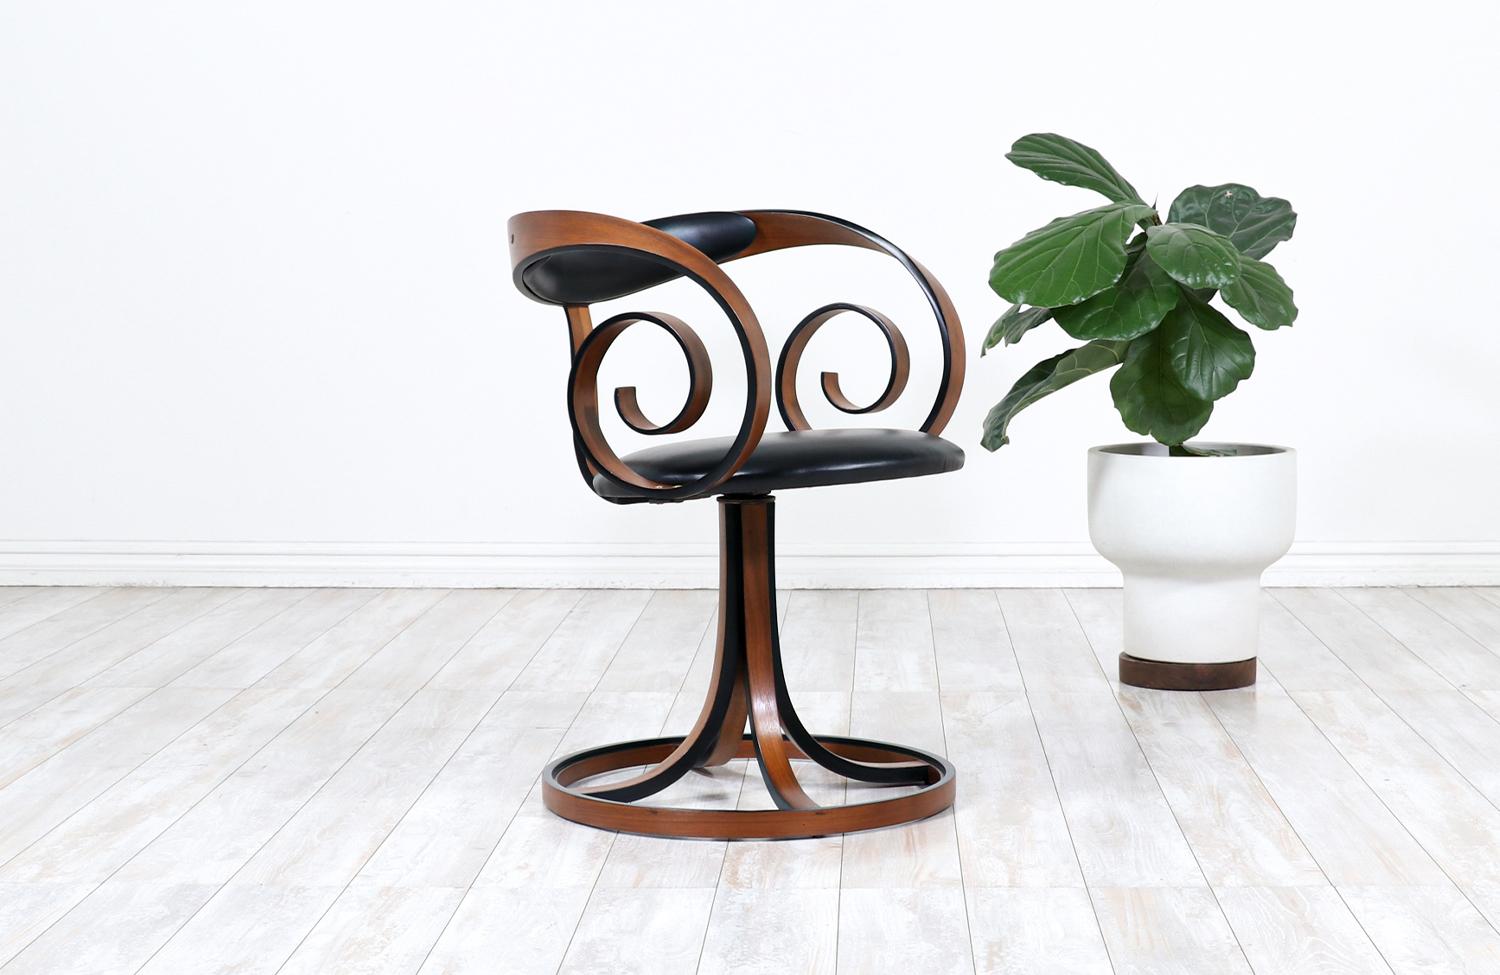 Rare armchair designed by George Mulhauser for Plycraft Co. in the United States circa 1950s. This extraordinary swivel chair has been sturdily constructed with laminated walnut bentwood visible in the organic contours and definitive lines showing